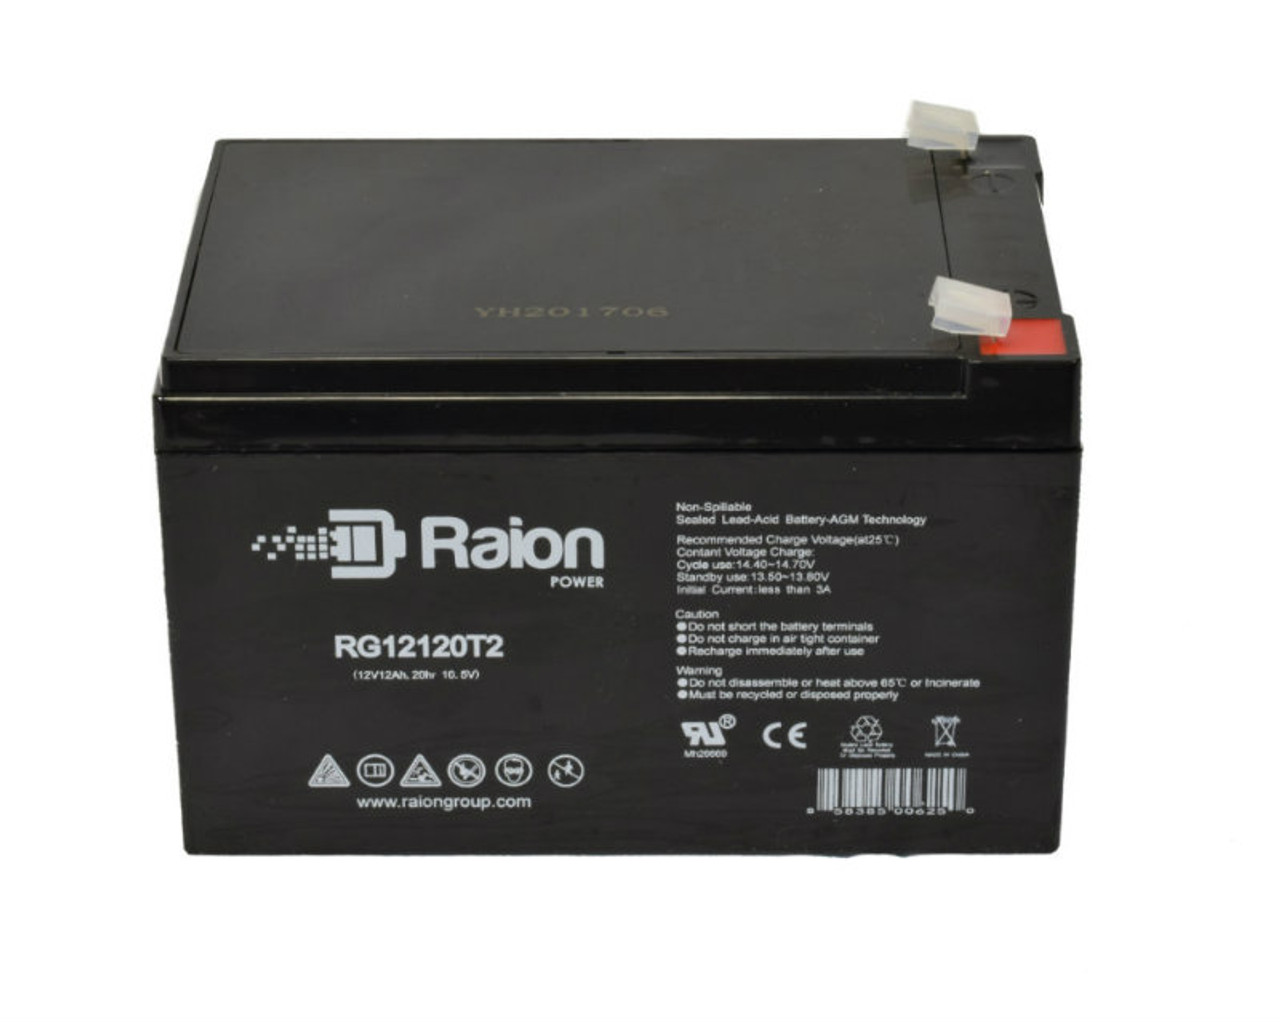 Raion Power RG12120T2 Replacement Battery Cartridge for Datashield 262S